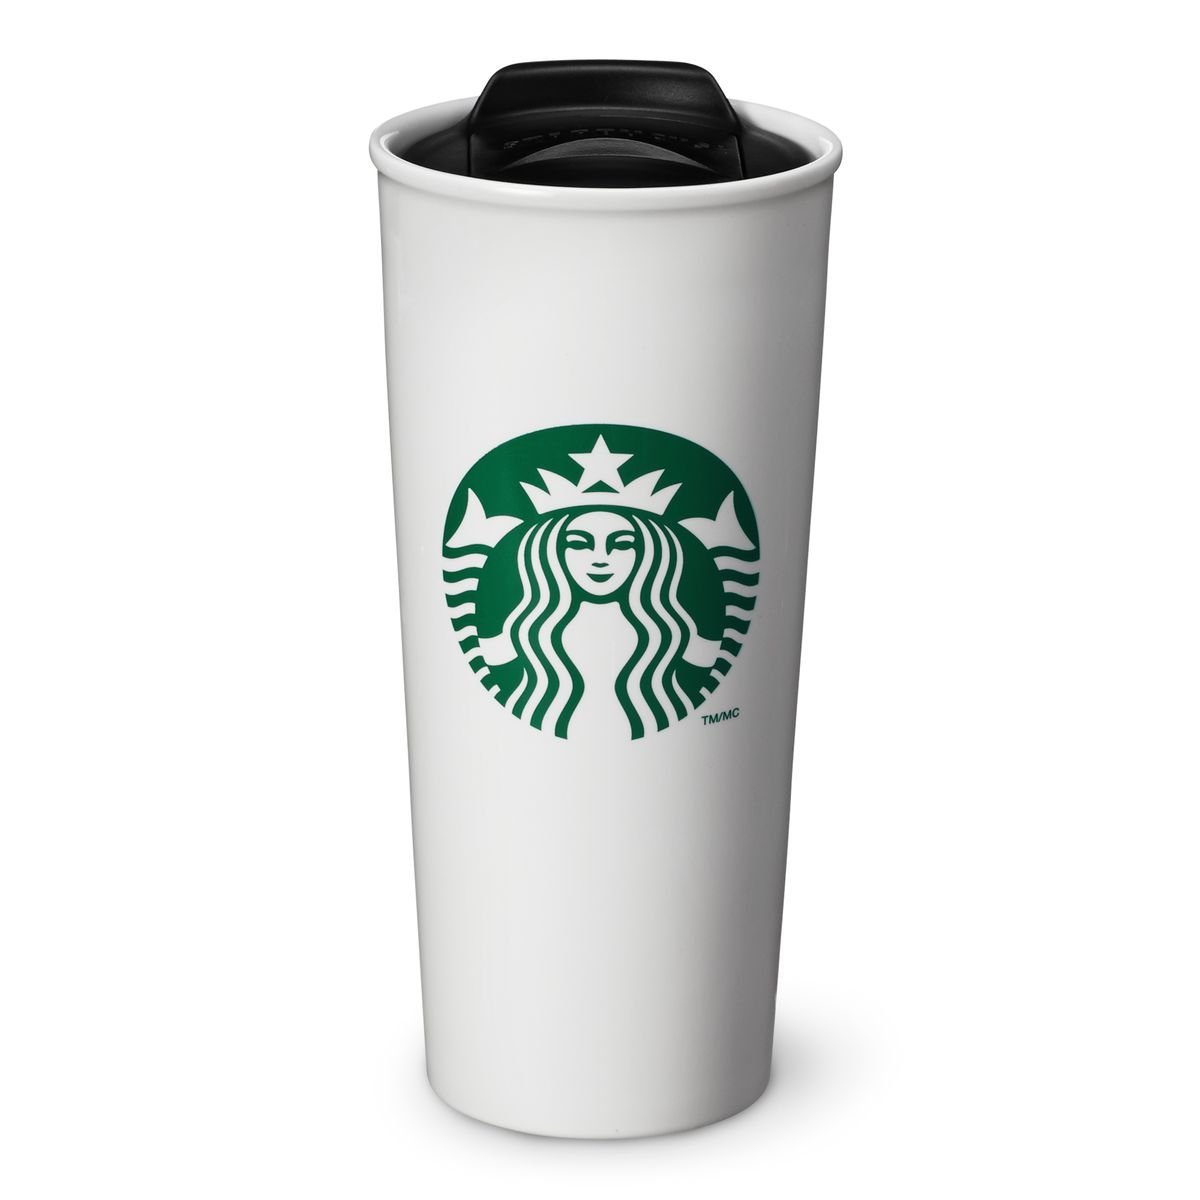 Starbucks Double Wall Ceramic Traveler Coffee Mug - Don't know what to get for mom this Mother's Day? Here are a few Pretty Gifts For Mom on Mother's Day she will love! | OHMY-CREATIVE.COM